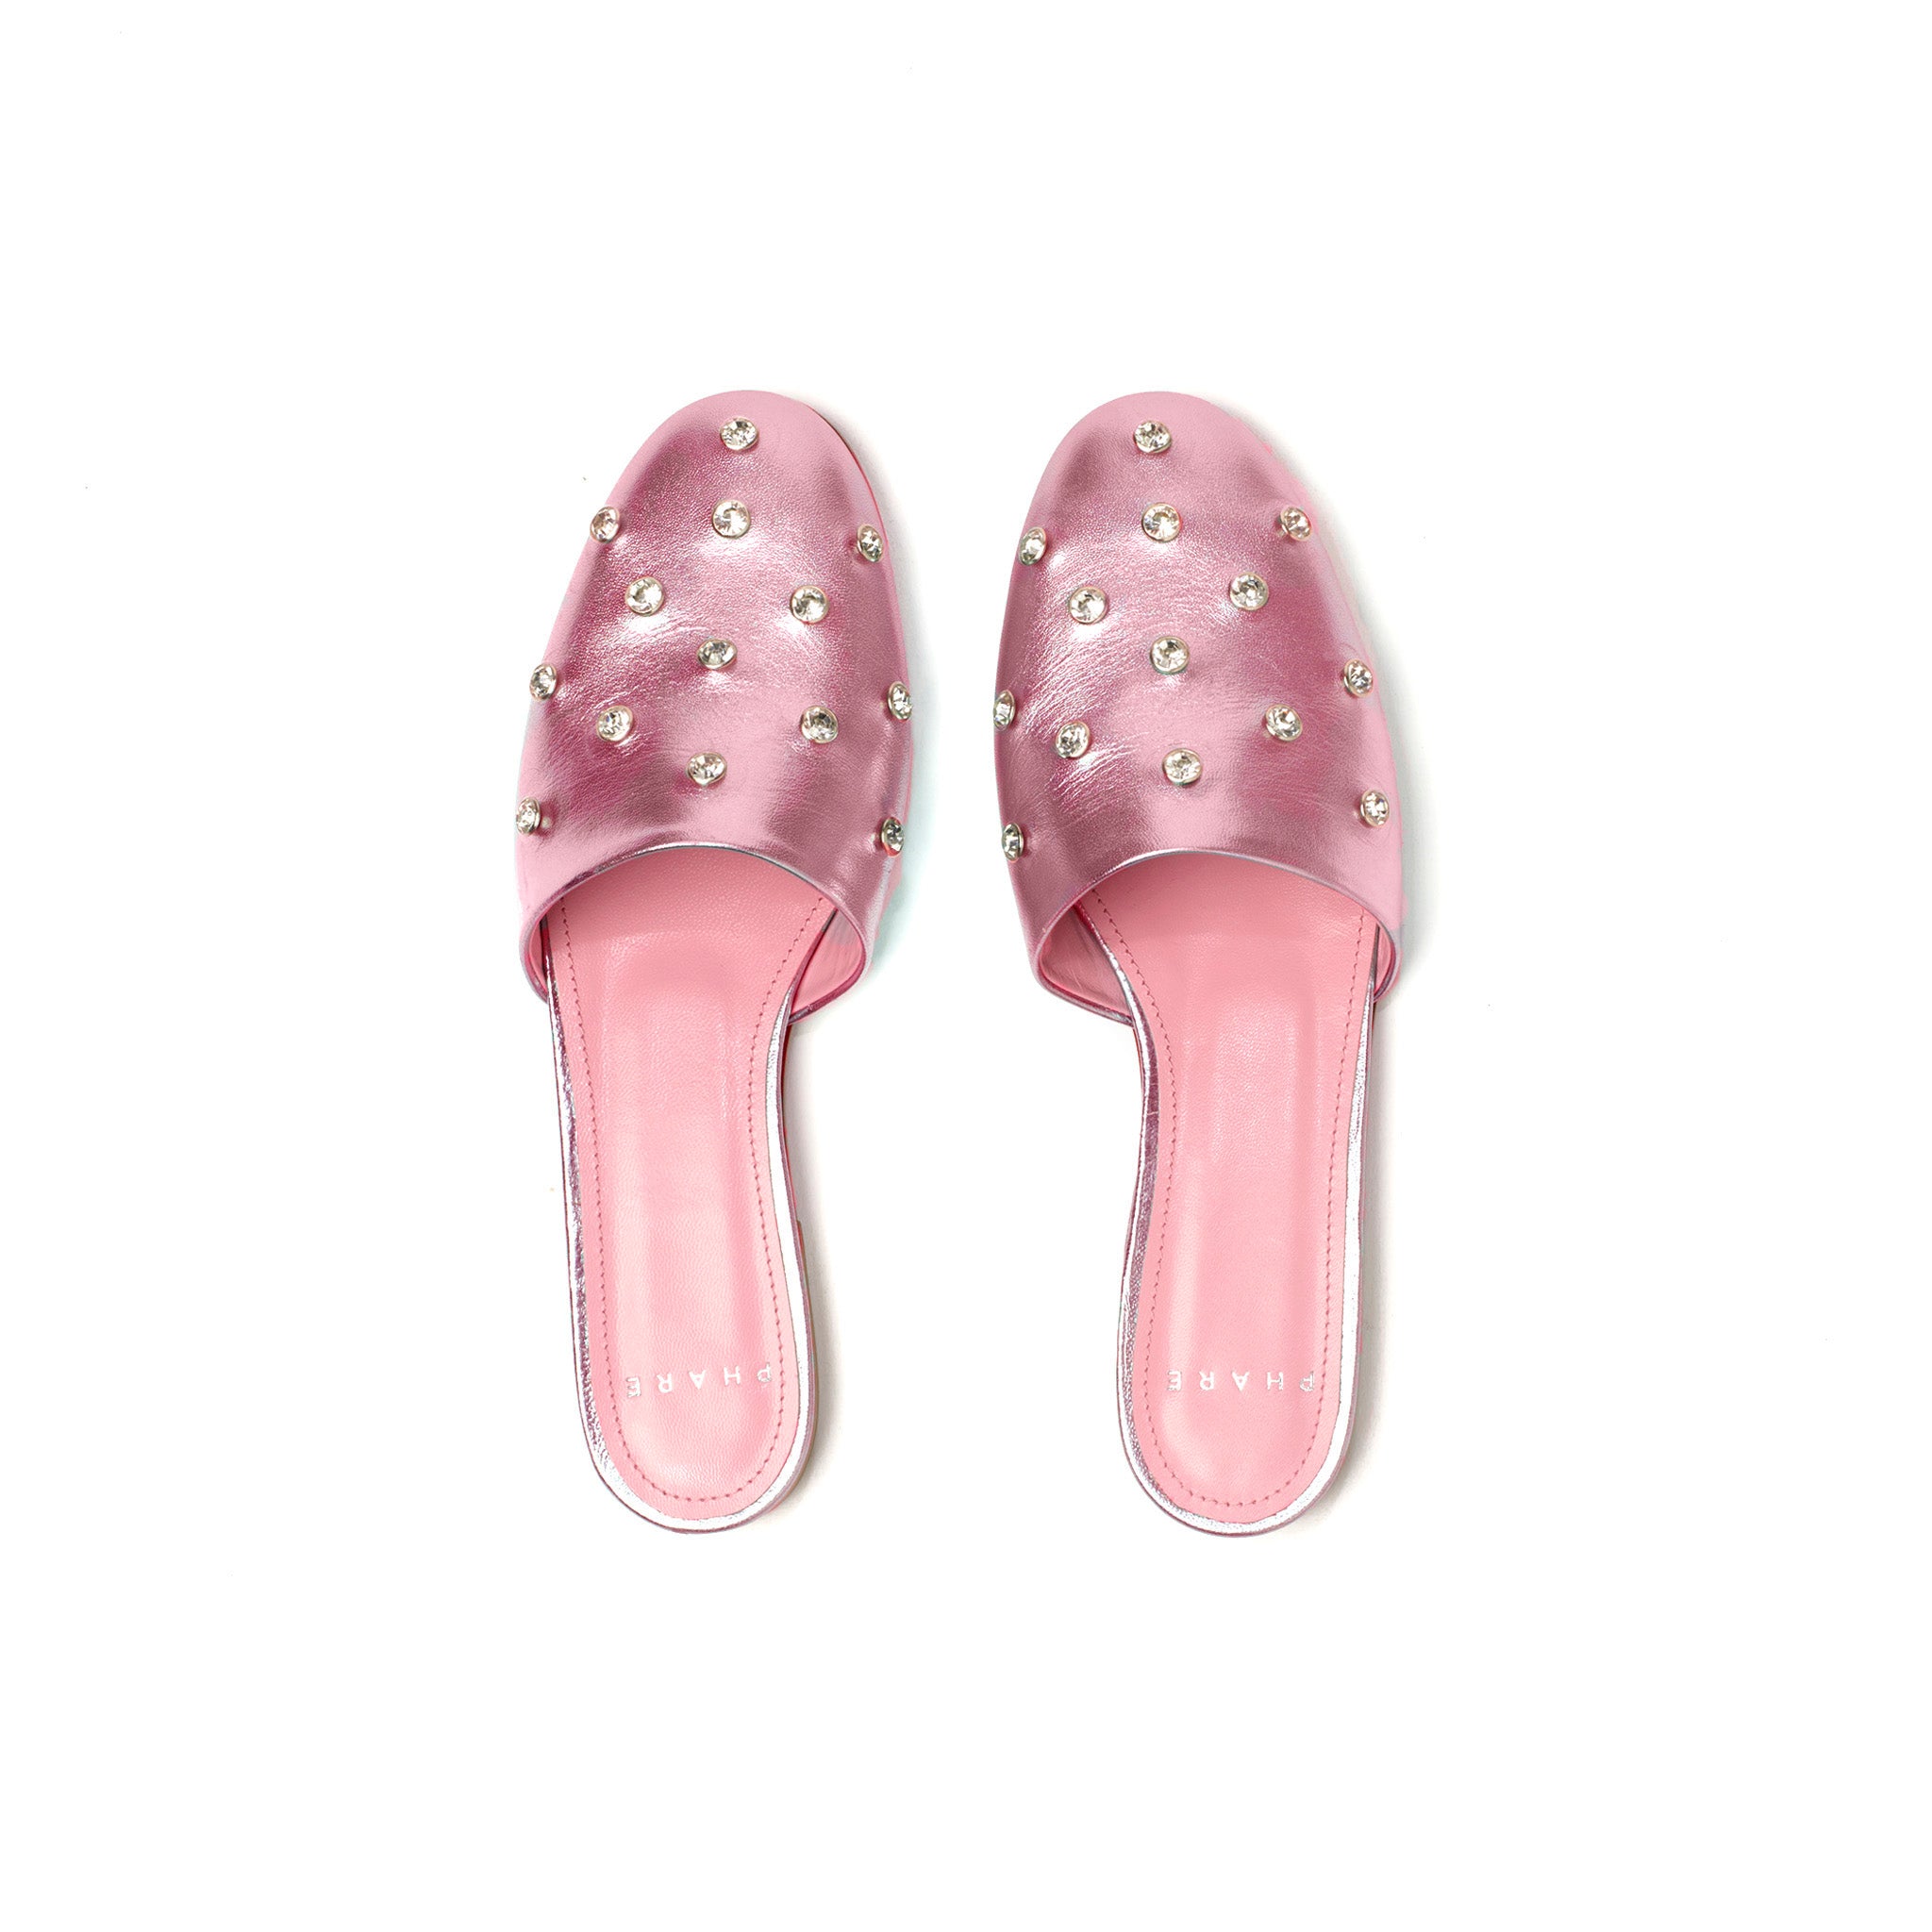 Phare crystal embellished slipper in rosa metallic leather top view 